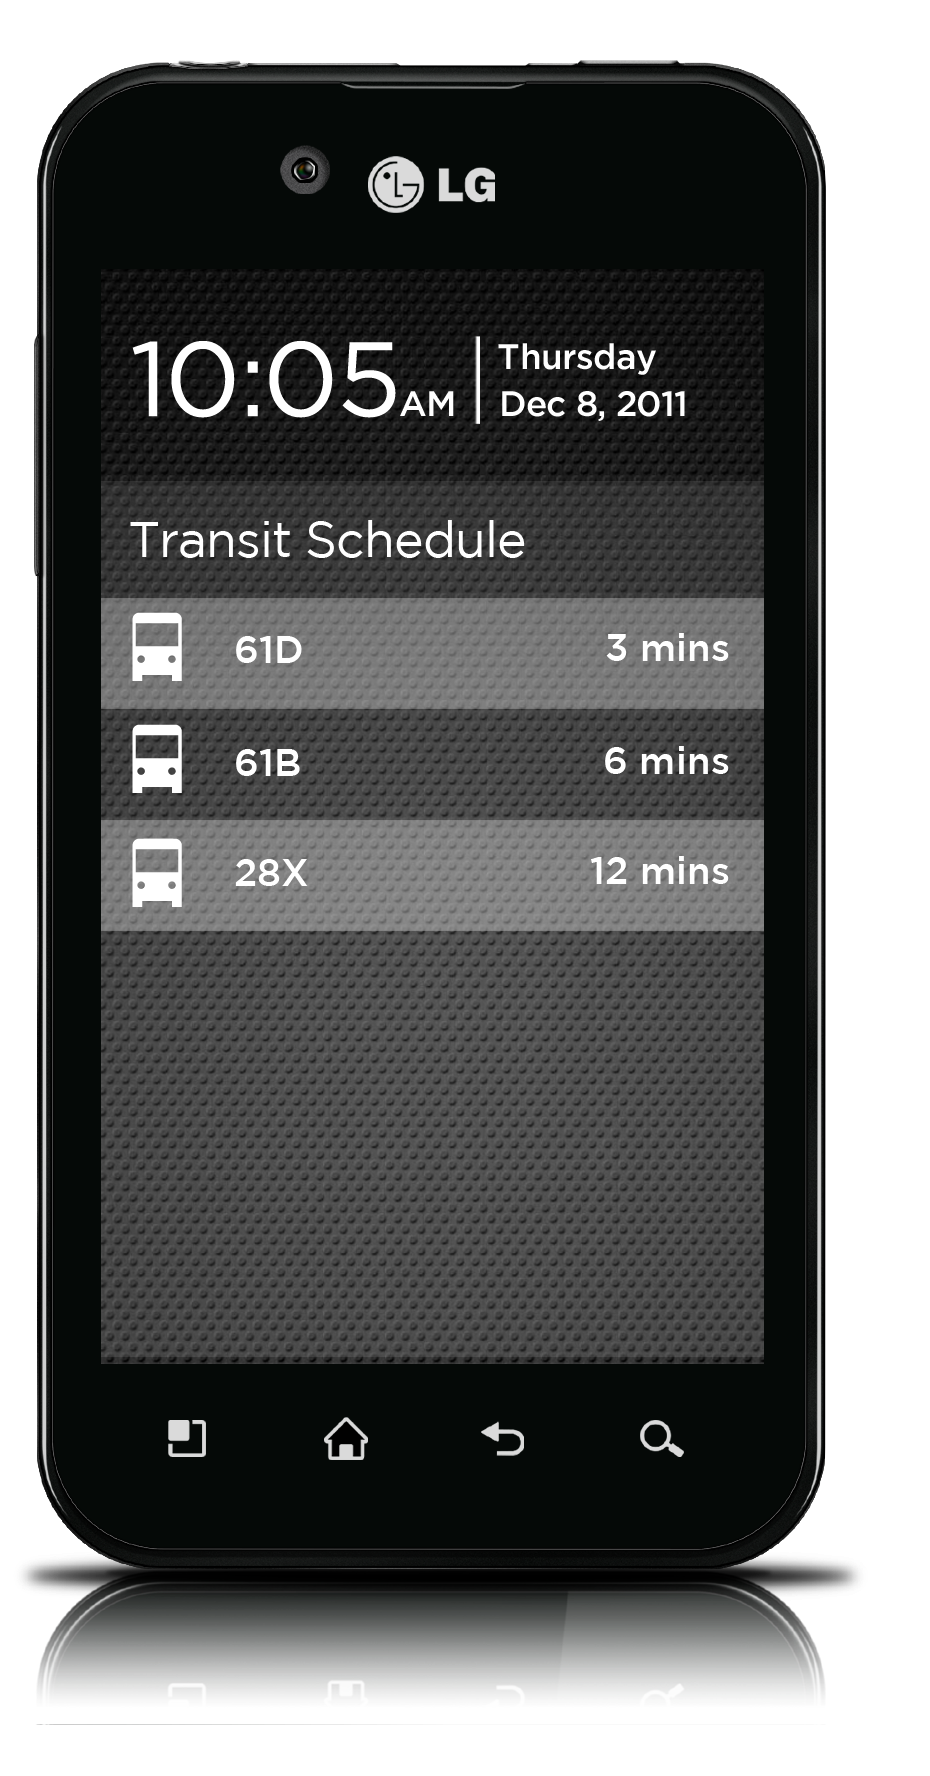 Upcoming public transit schedule is shown for the user's stop